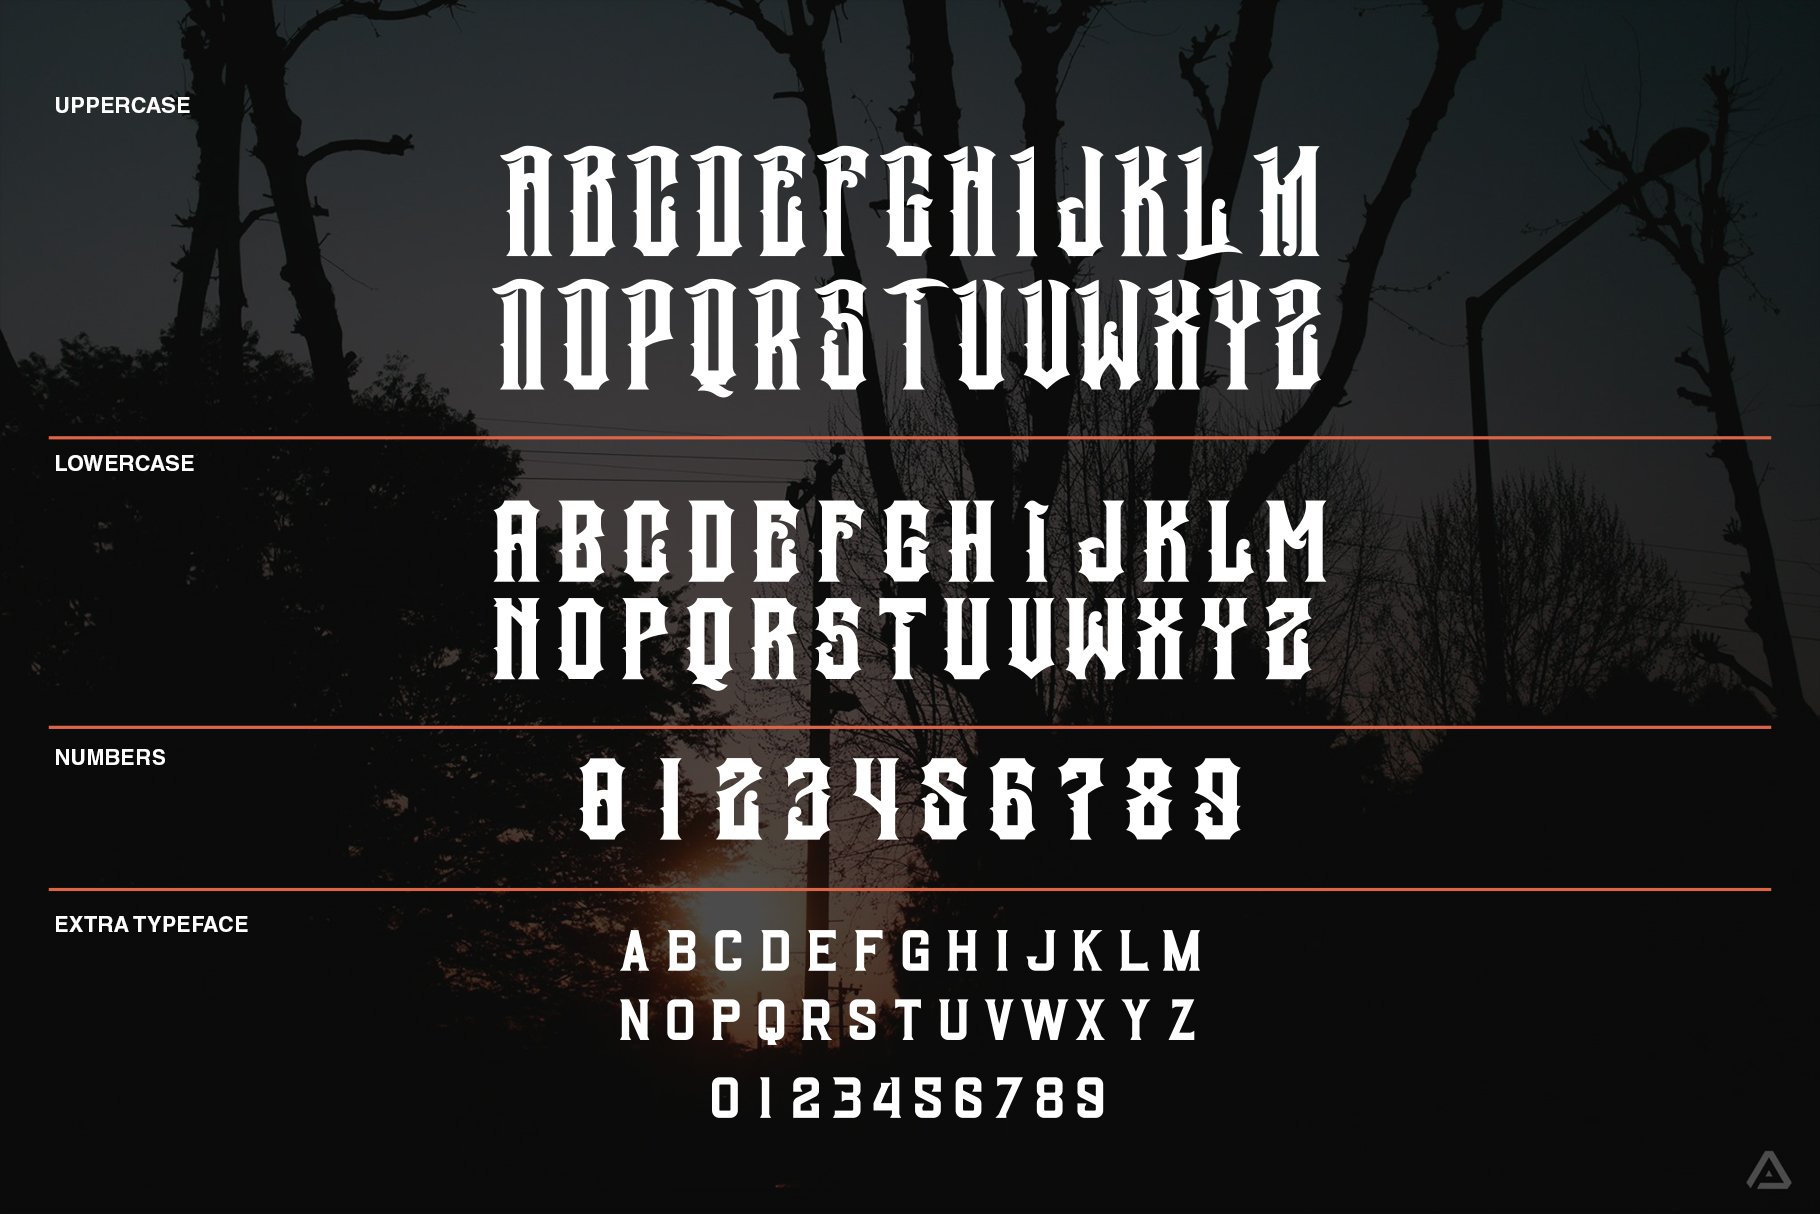 RSB VlackFink Typeface preview image.